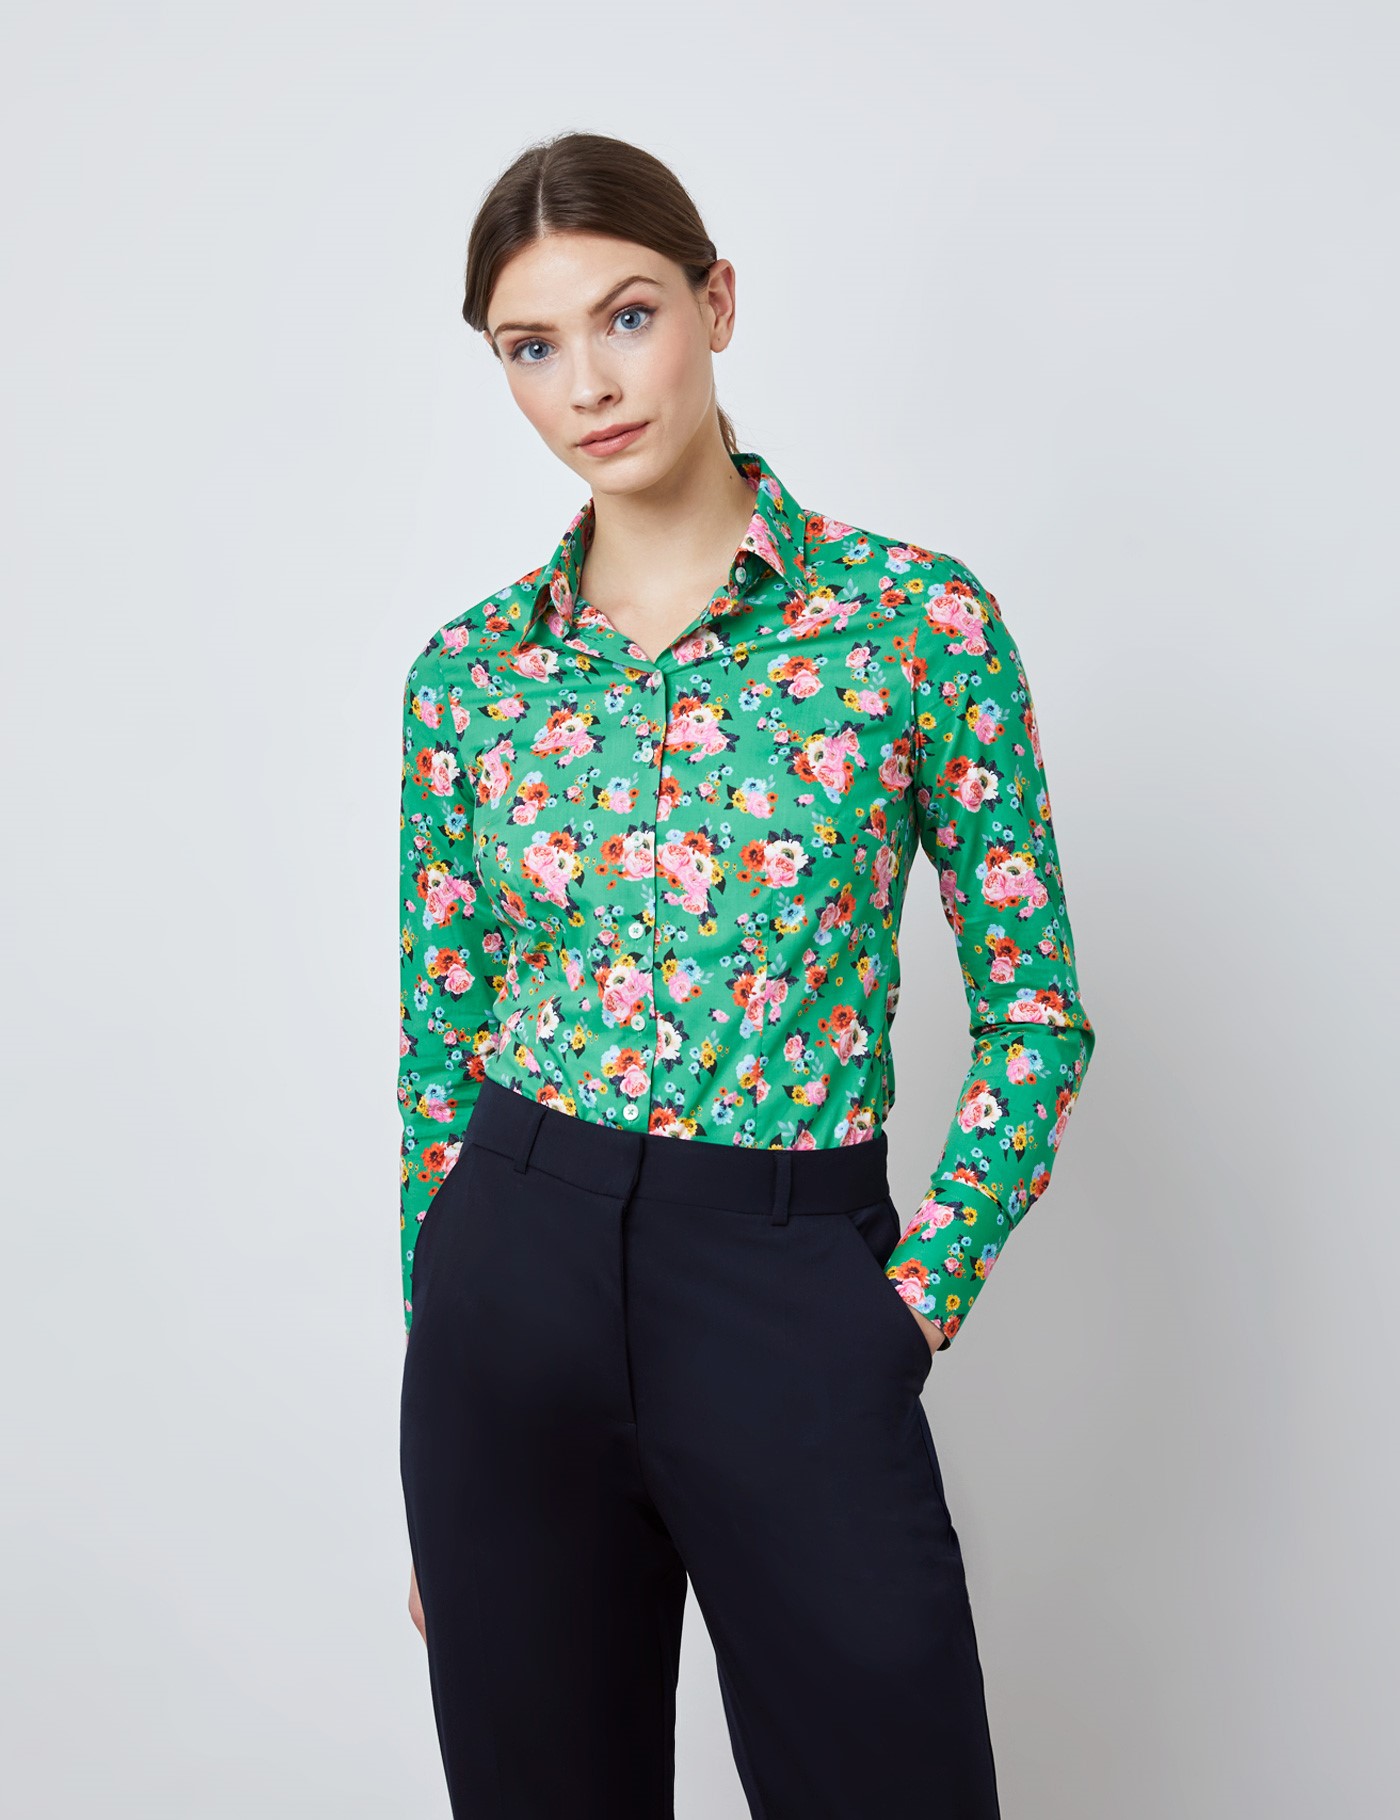 Cotton Floral Women's Fitted Shirt with Single Cuff in Green & Pink ...